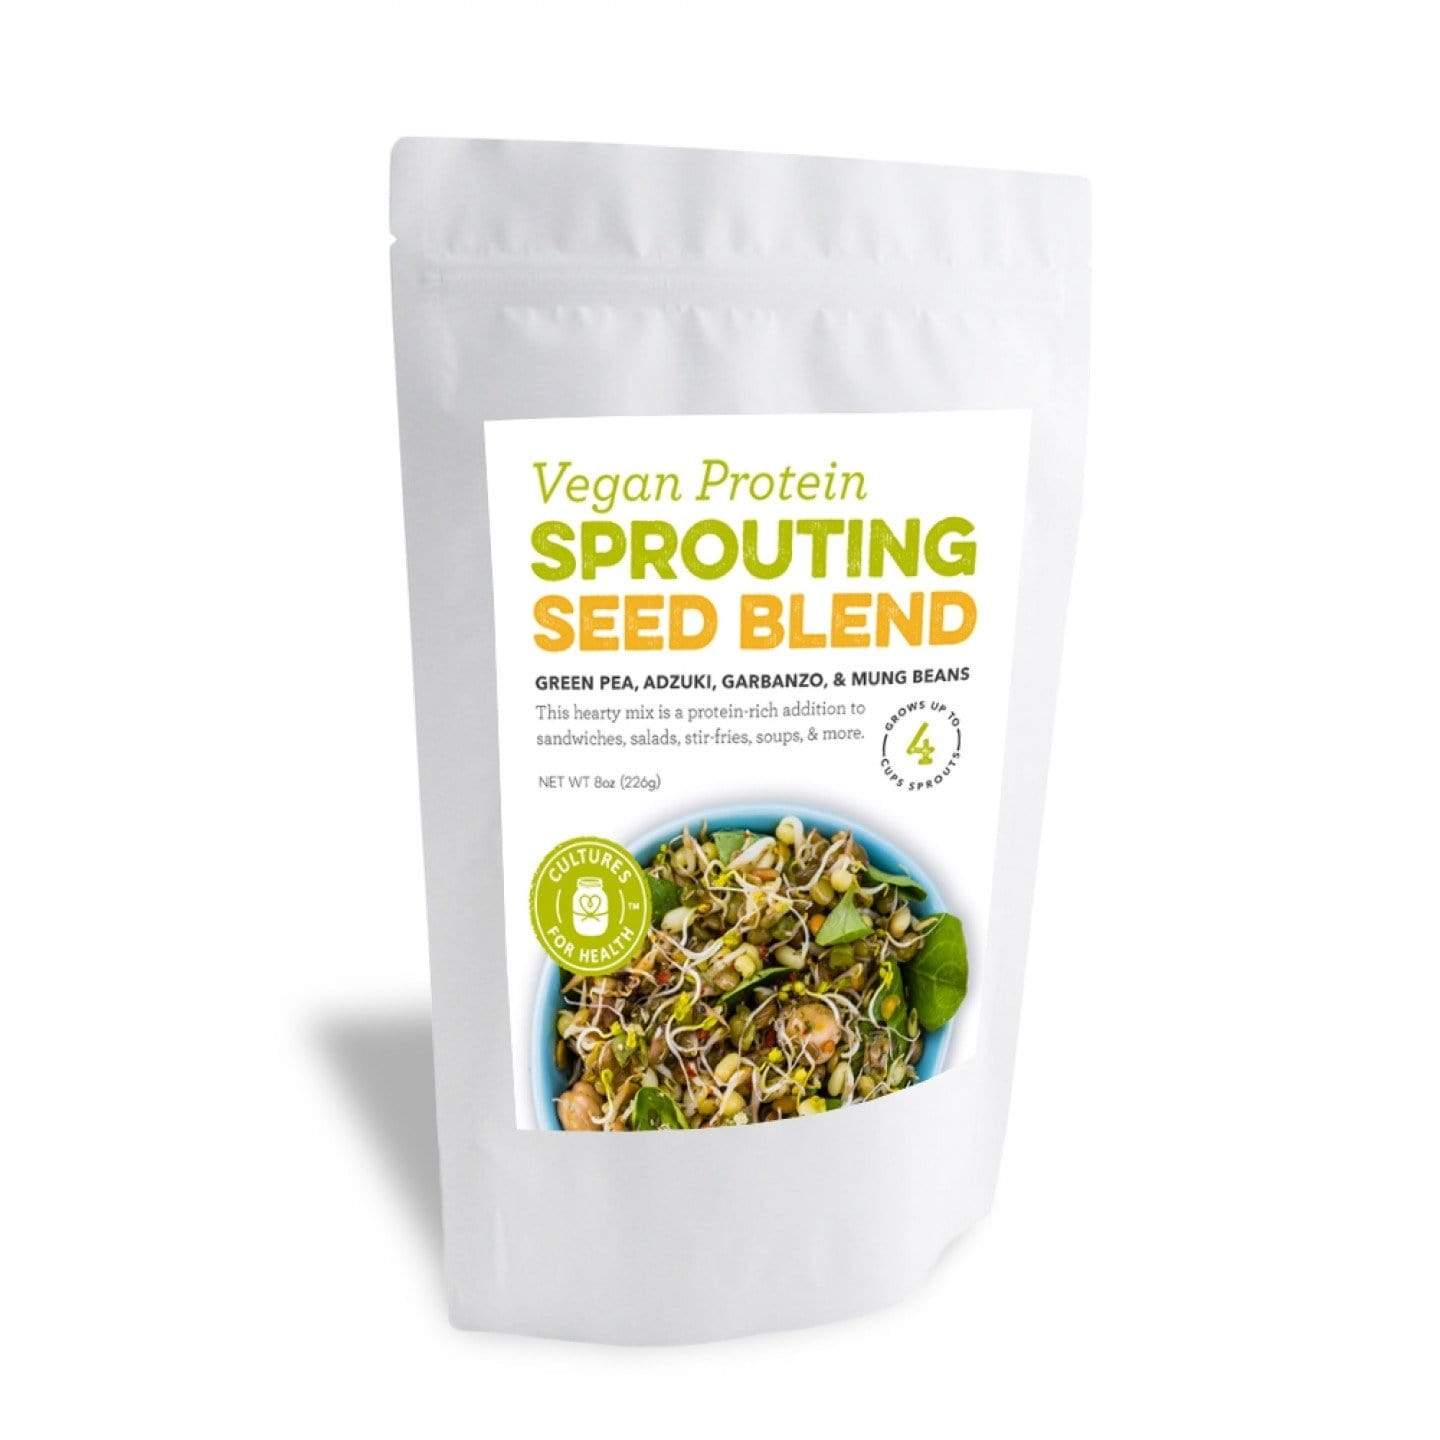 Sprouting & Wheatgrass Vegan Protein Sprouting Seed Blend